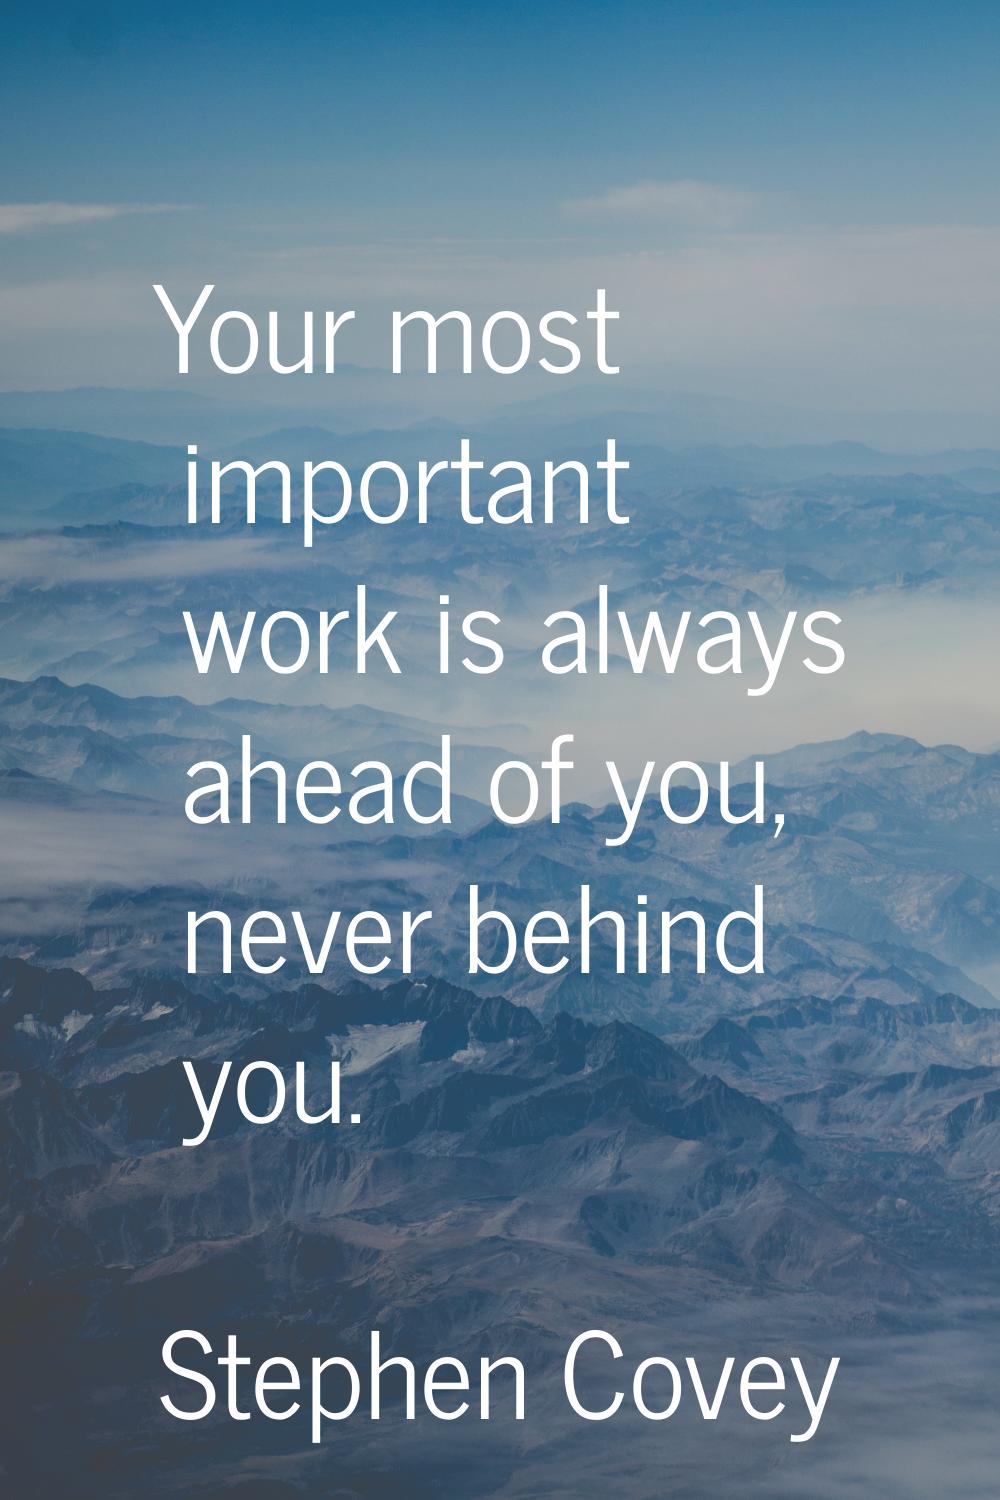 Your most important work is always ahead of you, never behind you.